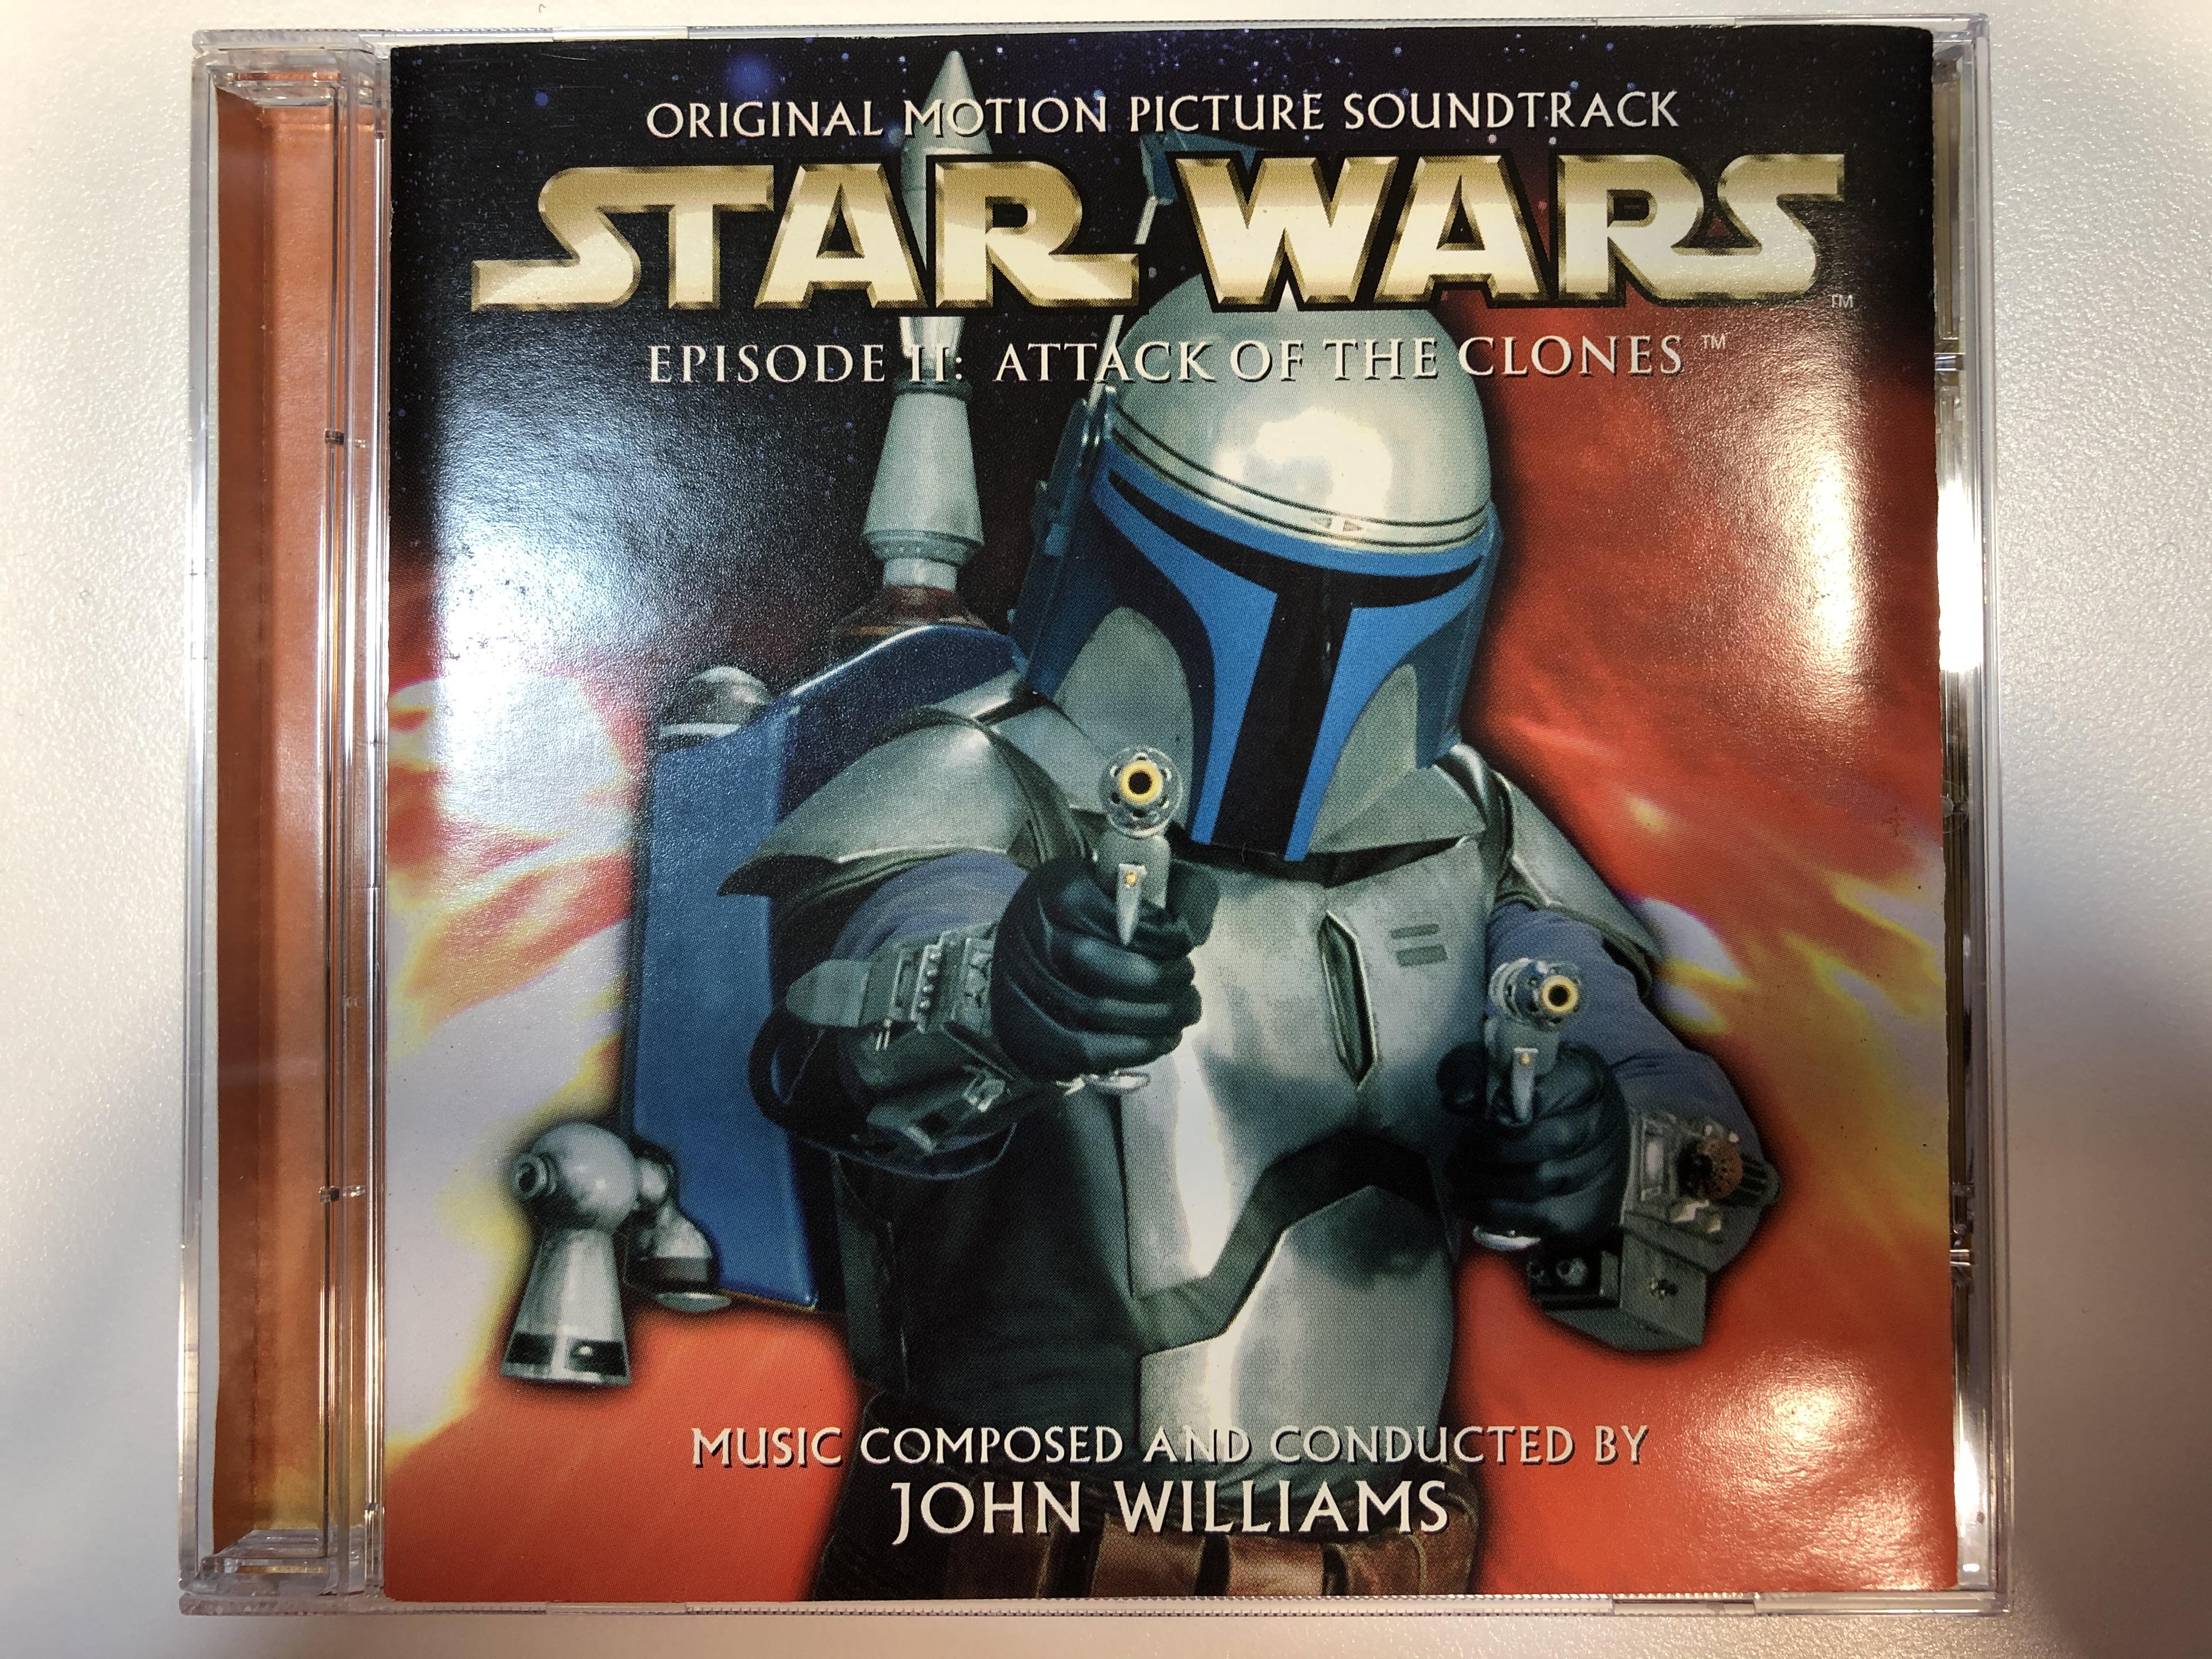 star-wars-episode-ii-attack-of-the-clones-original-motion-picture-soundtrack-music-composed-and-conducted-by-john-williams-sony-classical-audio-cd-2002-sk-89932-1-.jpg